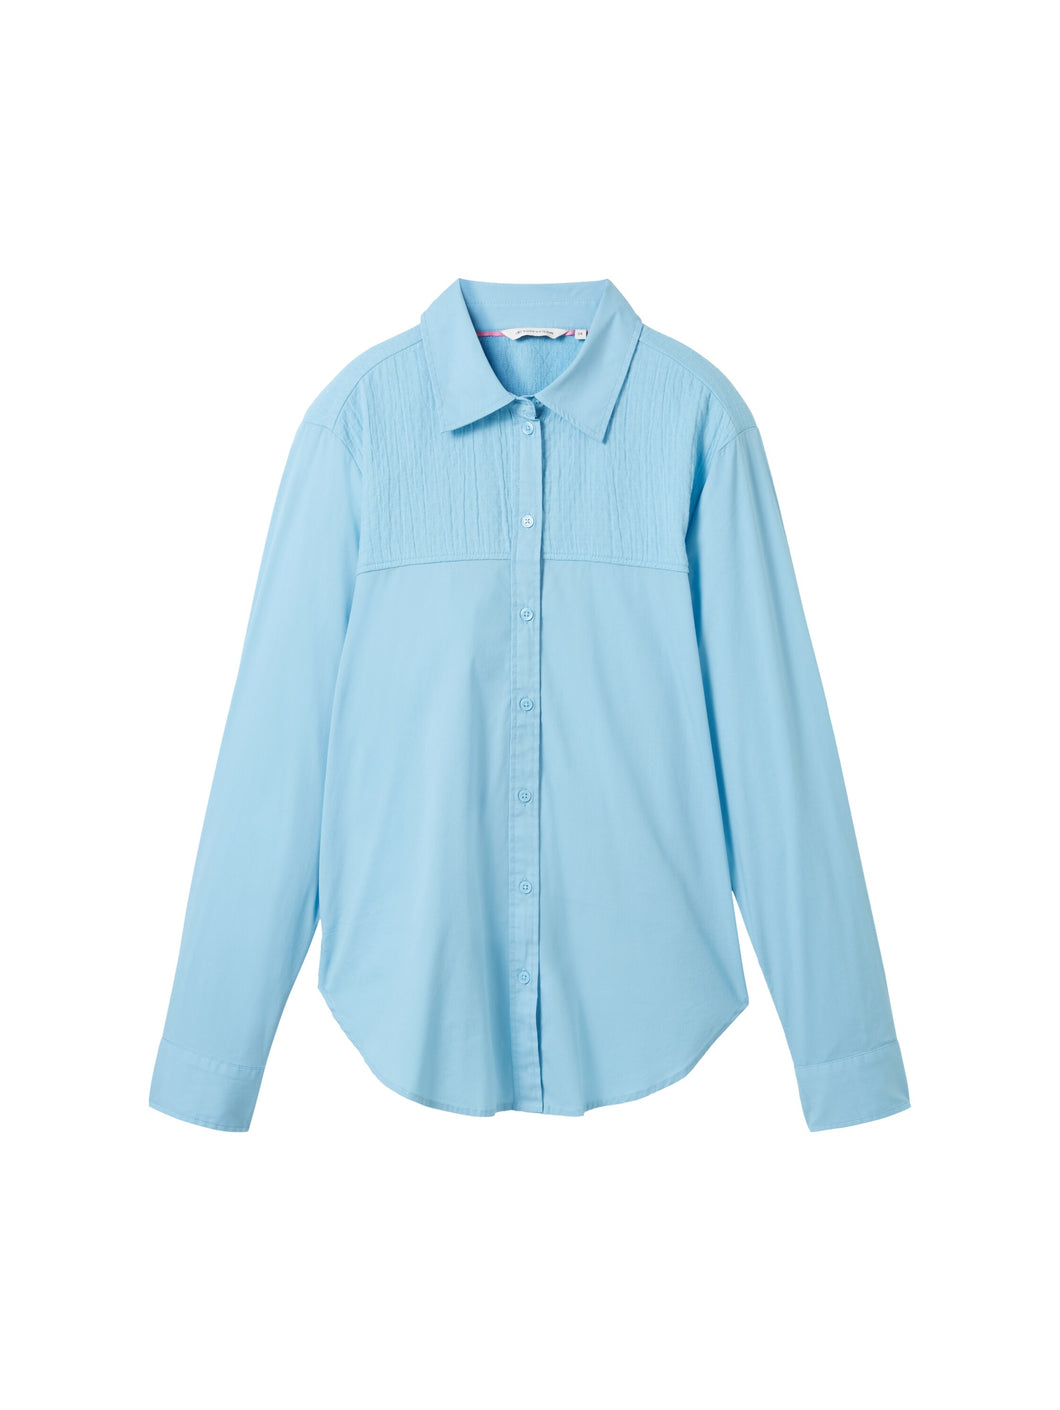 TOM TAILOR FABRIC MIX BLOUSE clear light blue